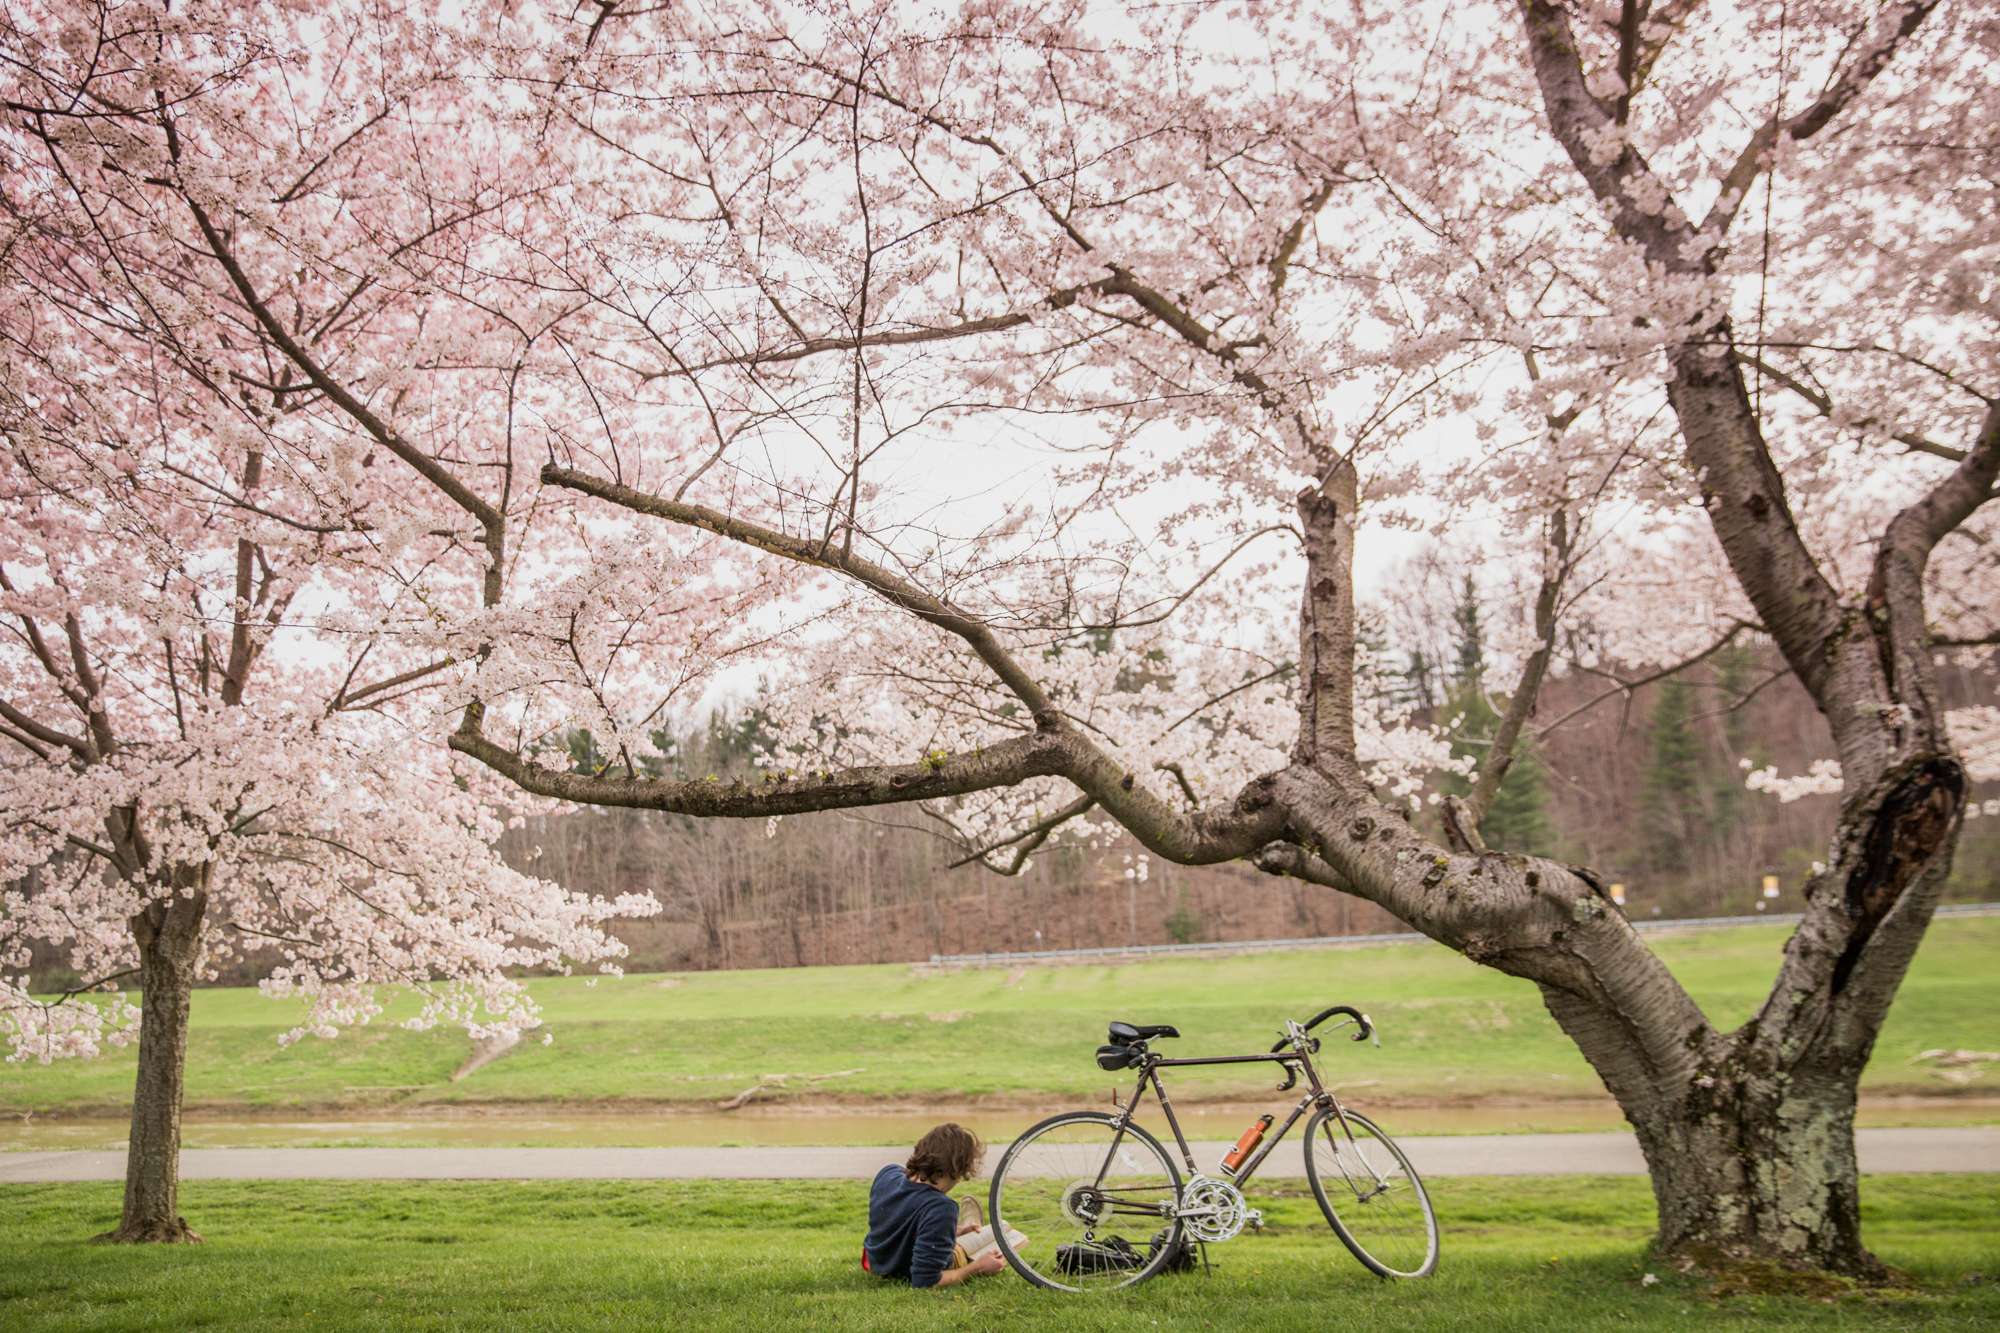 A man reads a book on the grass under a cherry tree next to his bicycle